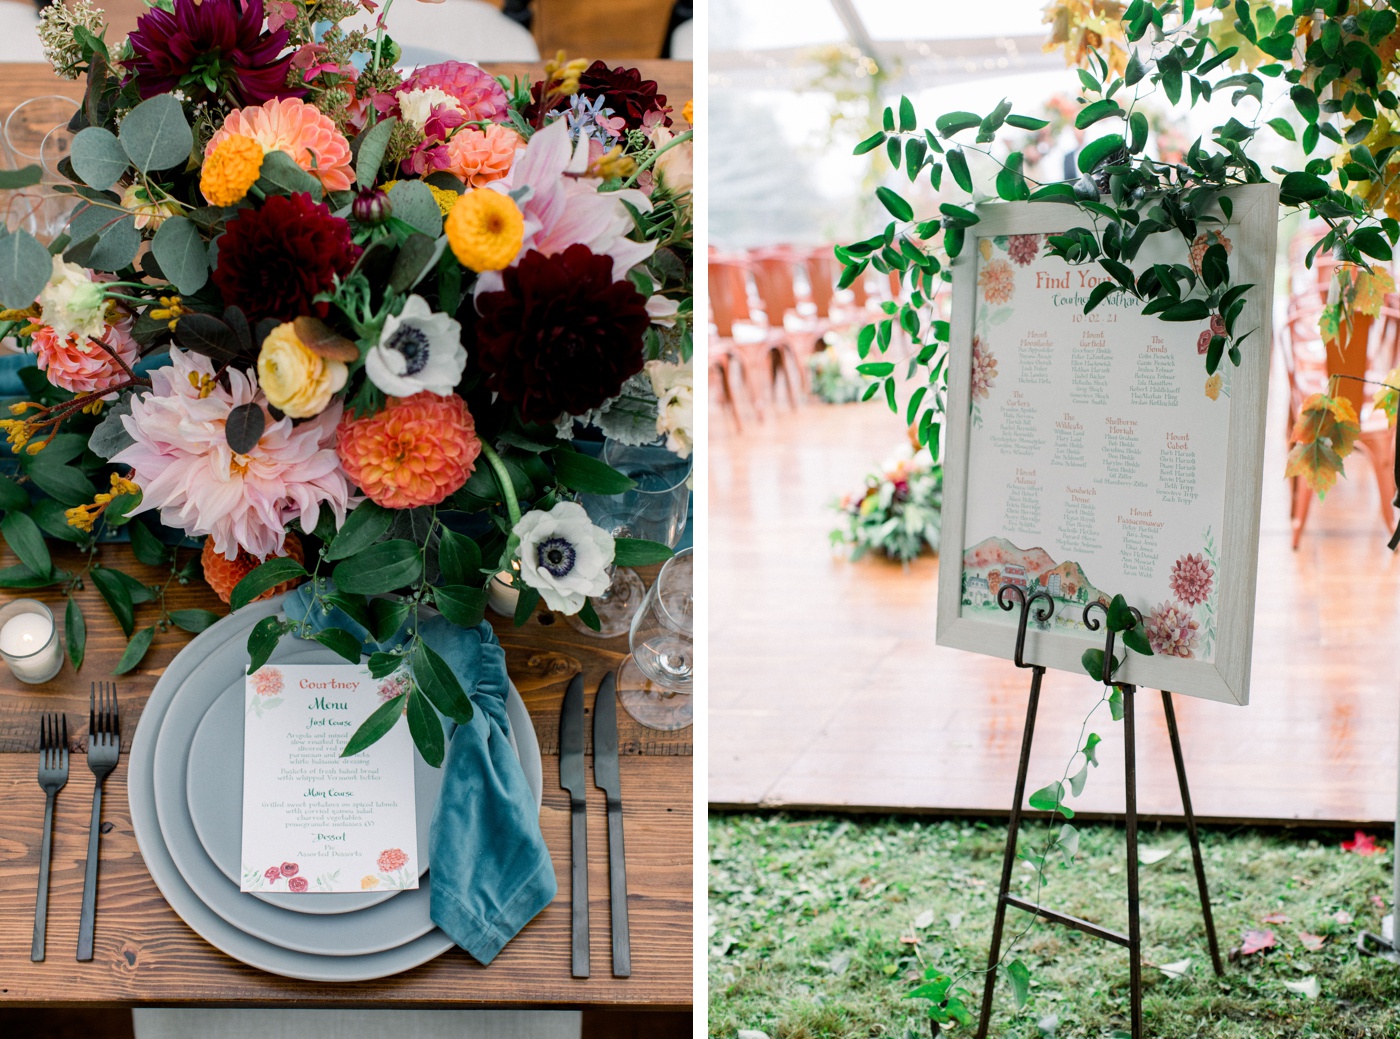 Turquoise linens and brightly colored flowers for a fall wedding reception